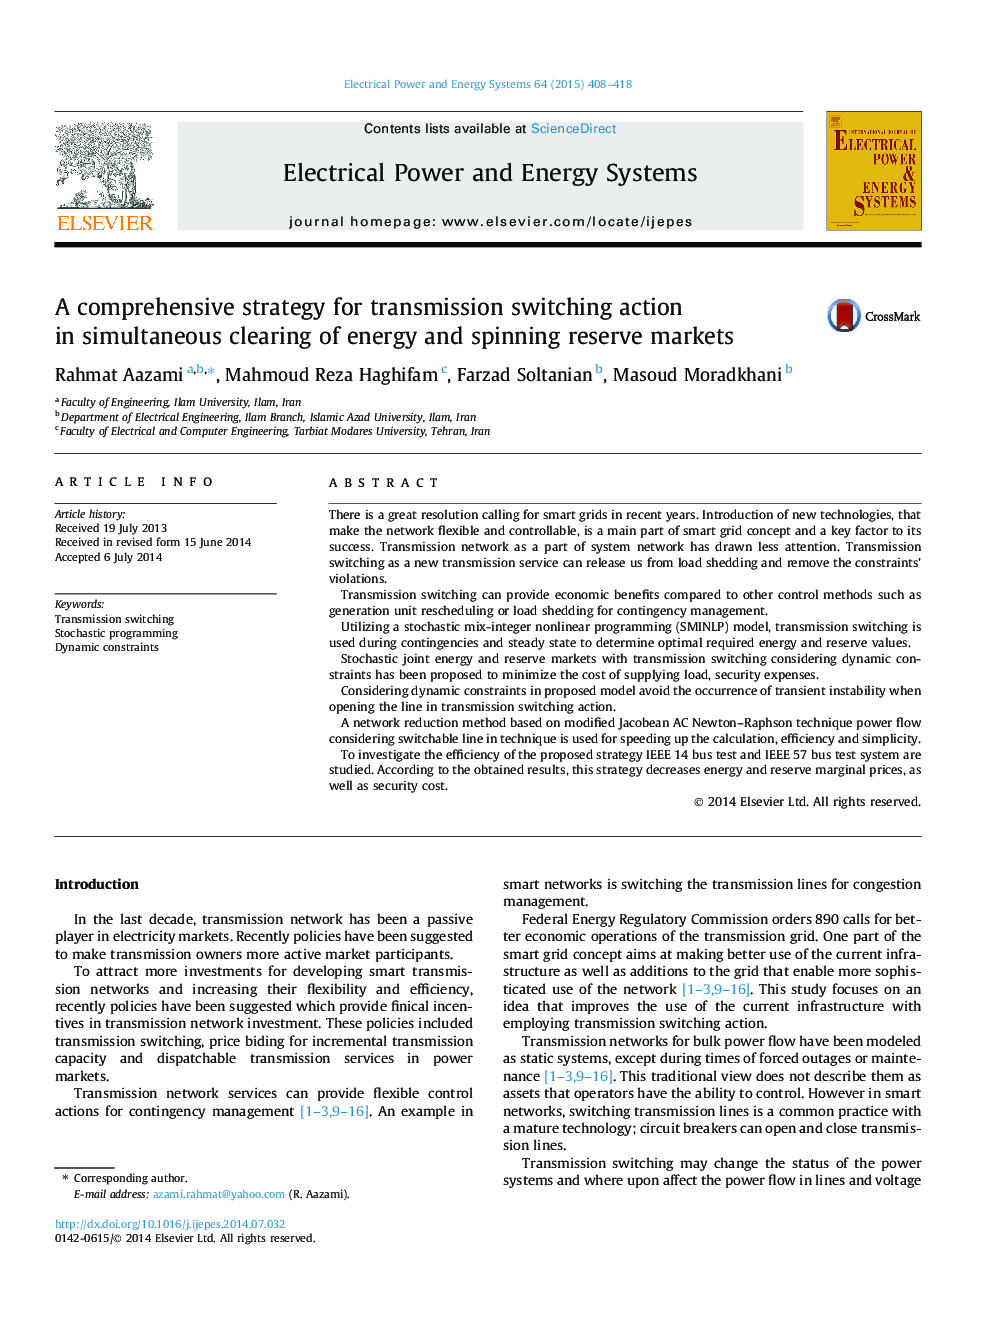 A comprehensive strategy for transmission switching action in simultaneous clearing of energy and spinning reserve markets